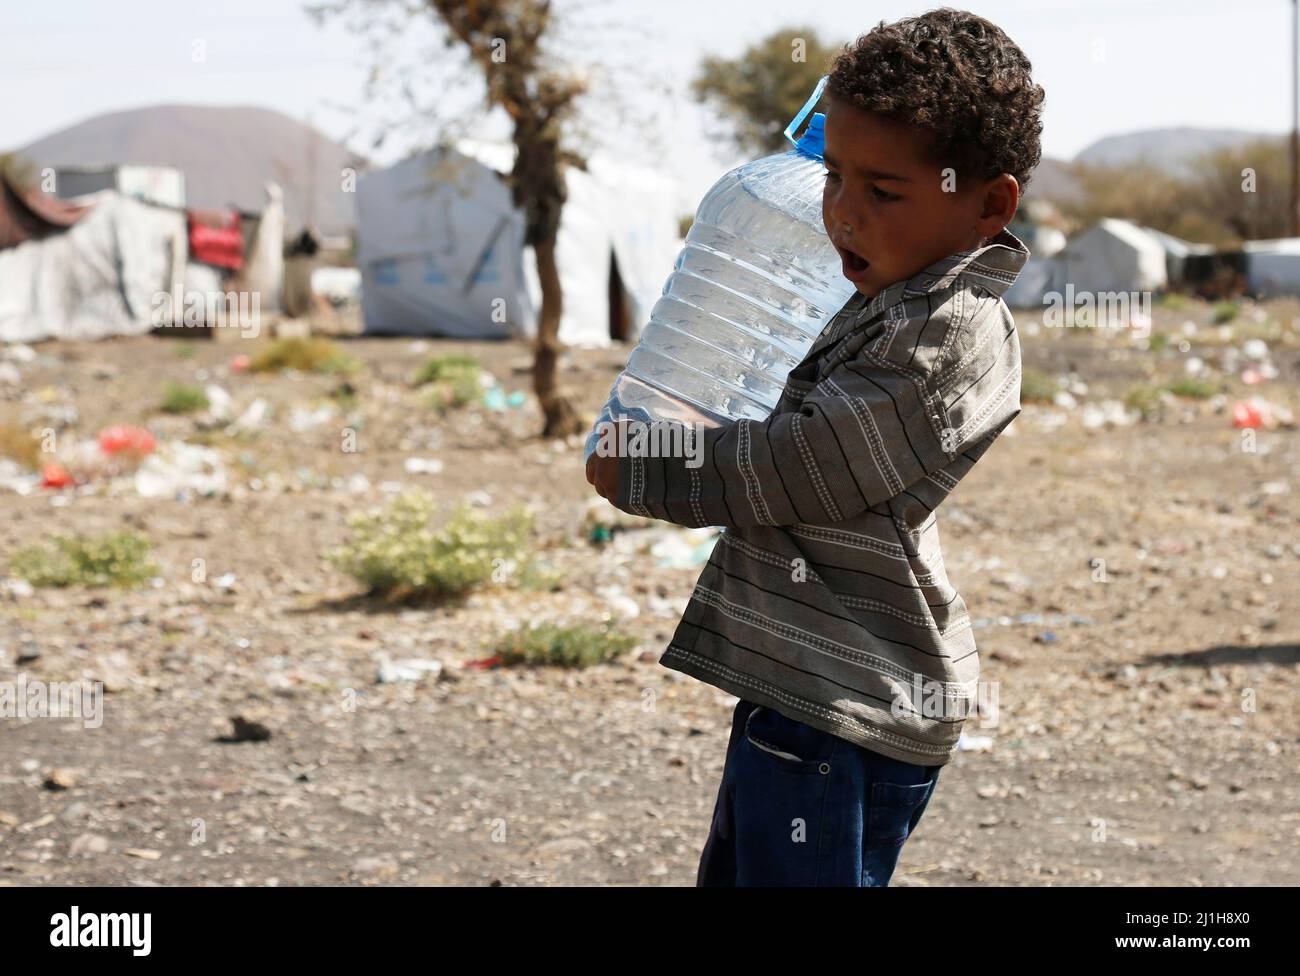 Sanaa, Yemen. 25th Mar, 2022. A child carries a bottle of water at the Dharawan camp for internally displaced persons (IDPs) near Sanaa, Yemen, on March 25, 2022. Yemen has been mired in a civil war since late 2014 when the Iran-backed Houthi militia seized control of several northern provinces and forced the Saudi-backed Yemeni government of President Abd-Rabbu Mansour Hadi out of the capital Sanaa. Credit: Mohammed Mohammed/Xinhua/Alamy Live News Stock Photo